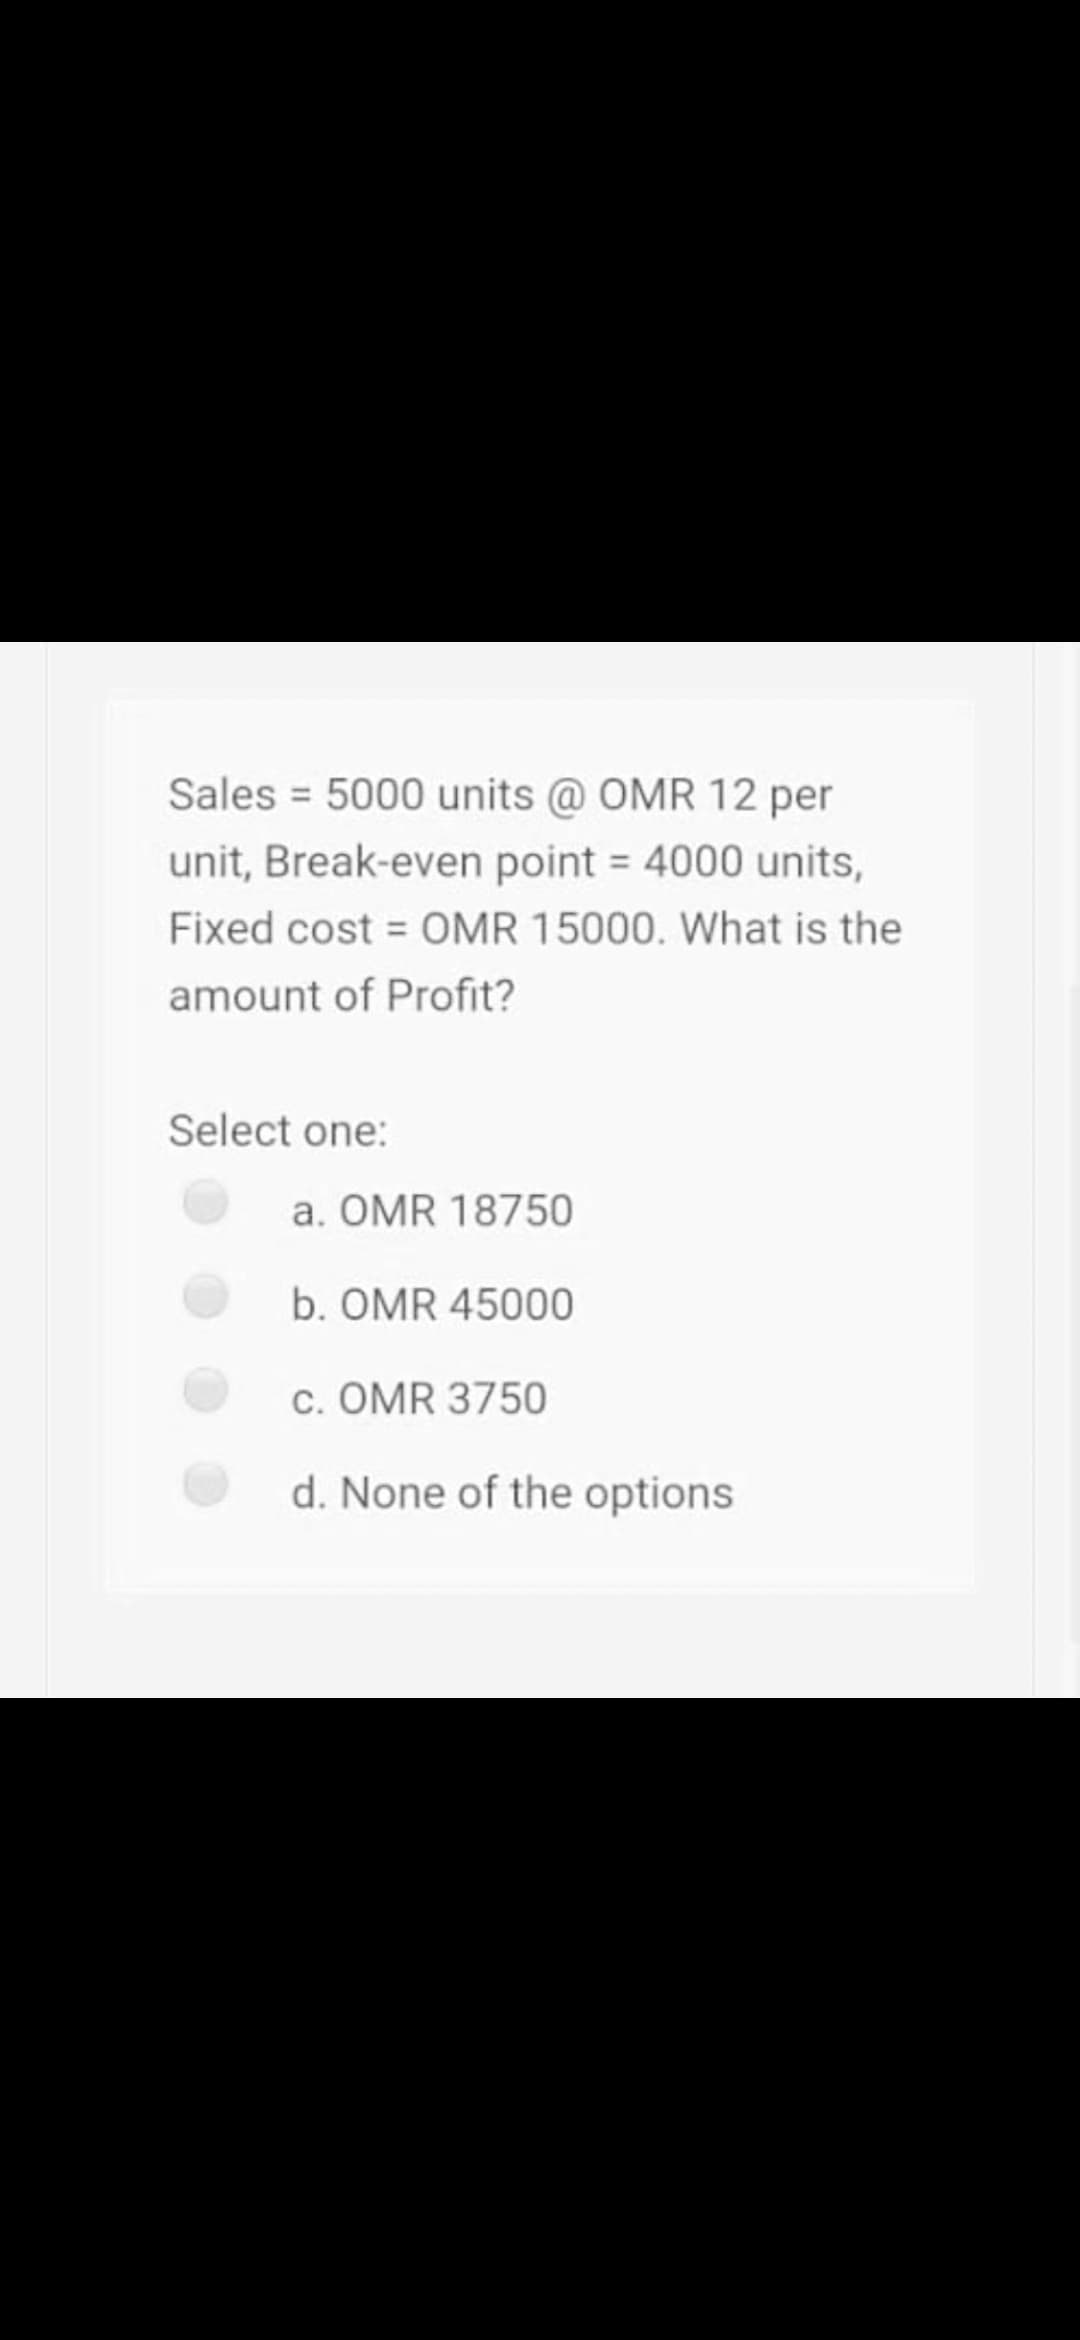 Sales = 5000 units @ OMR 12 per
unit, Break-even point = 4000 units,
Fixed cost = OMR 15000. What is the
amount of Profit?
Select one:
a. OMR 18750
b. OMR 45000
c. OMR 3750
d. None of the options
